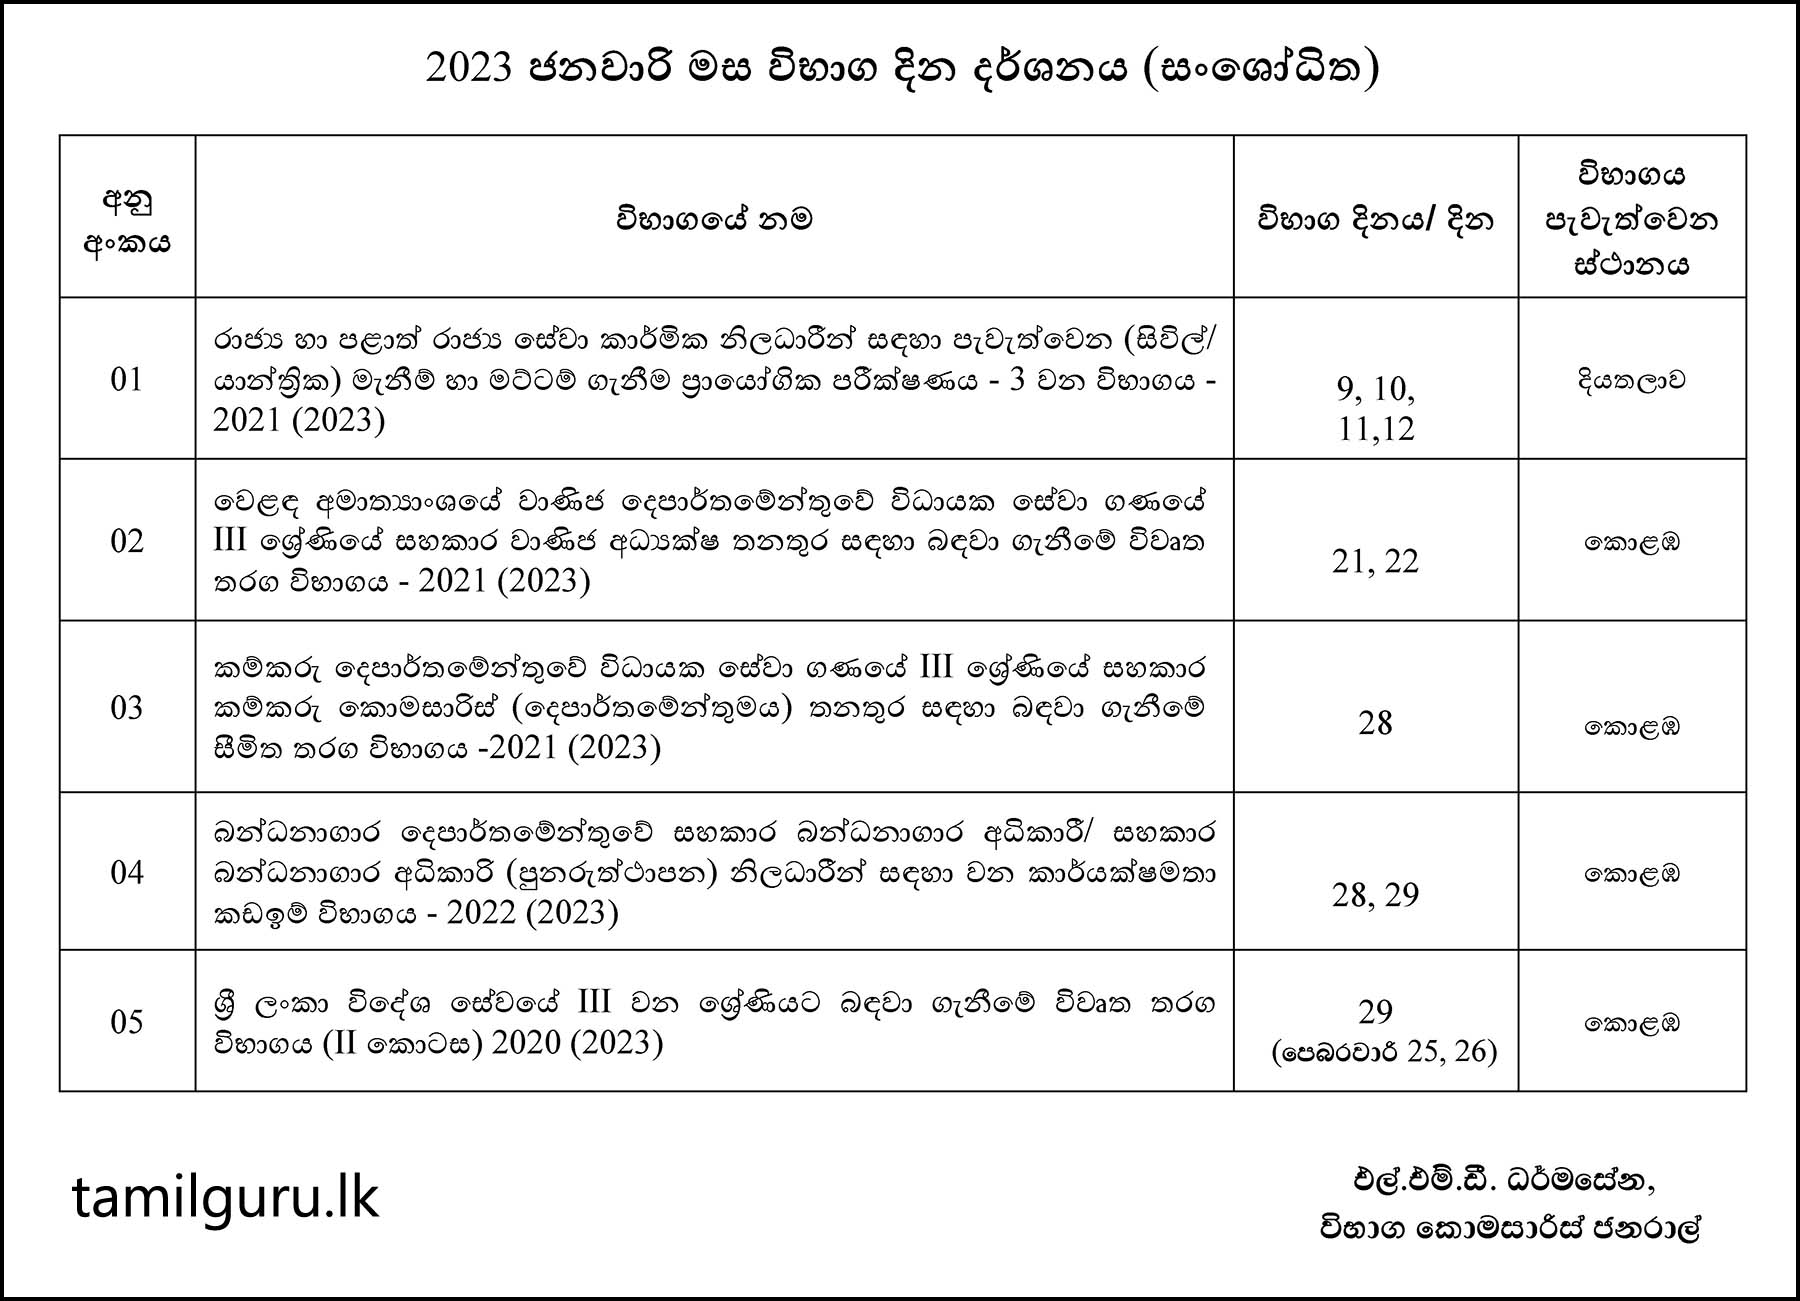 Examination Calendar for January 2023 - Department of Examinations (In Sinhala)